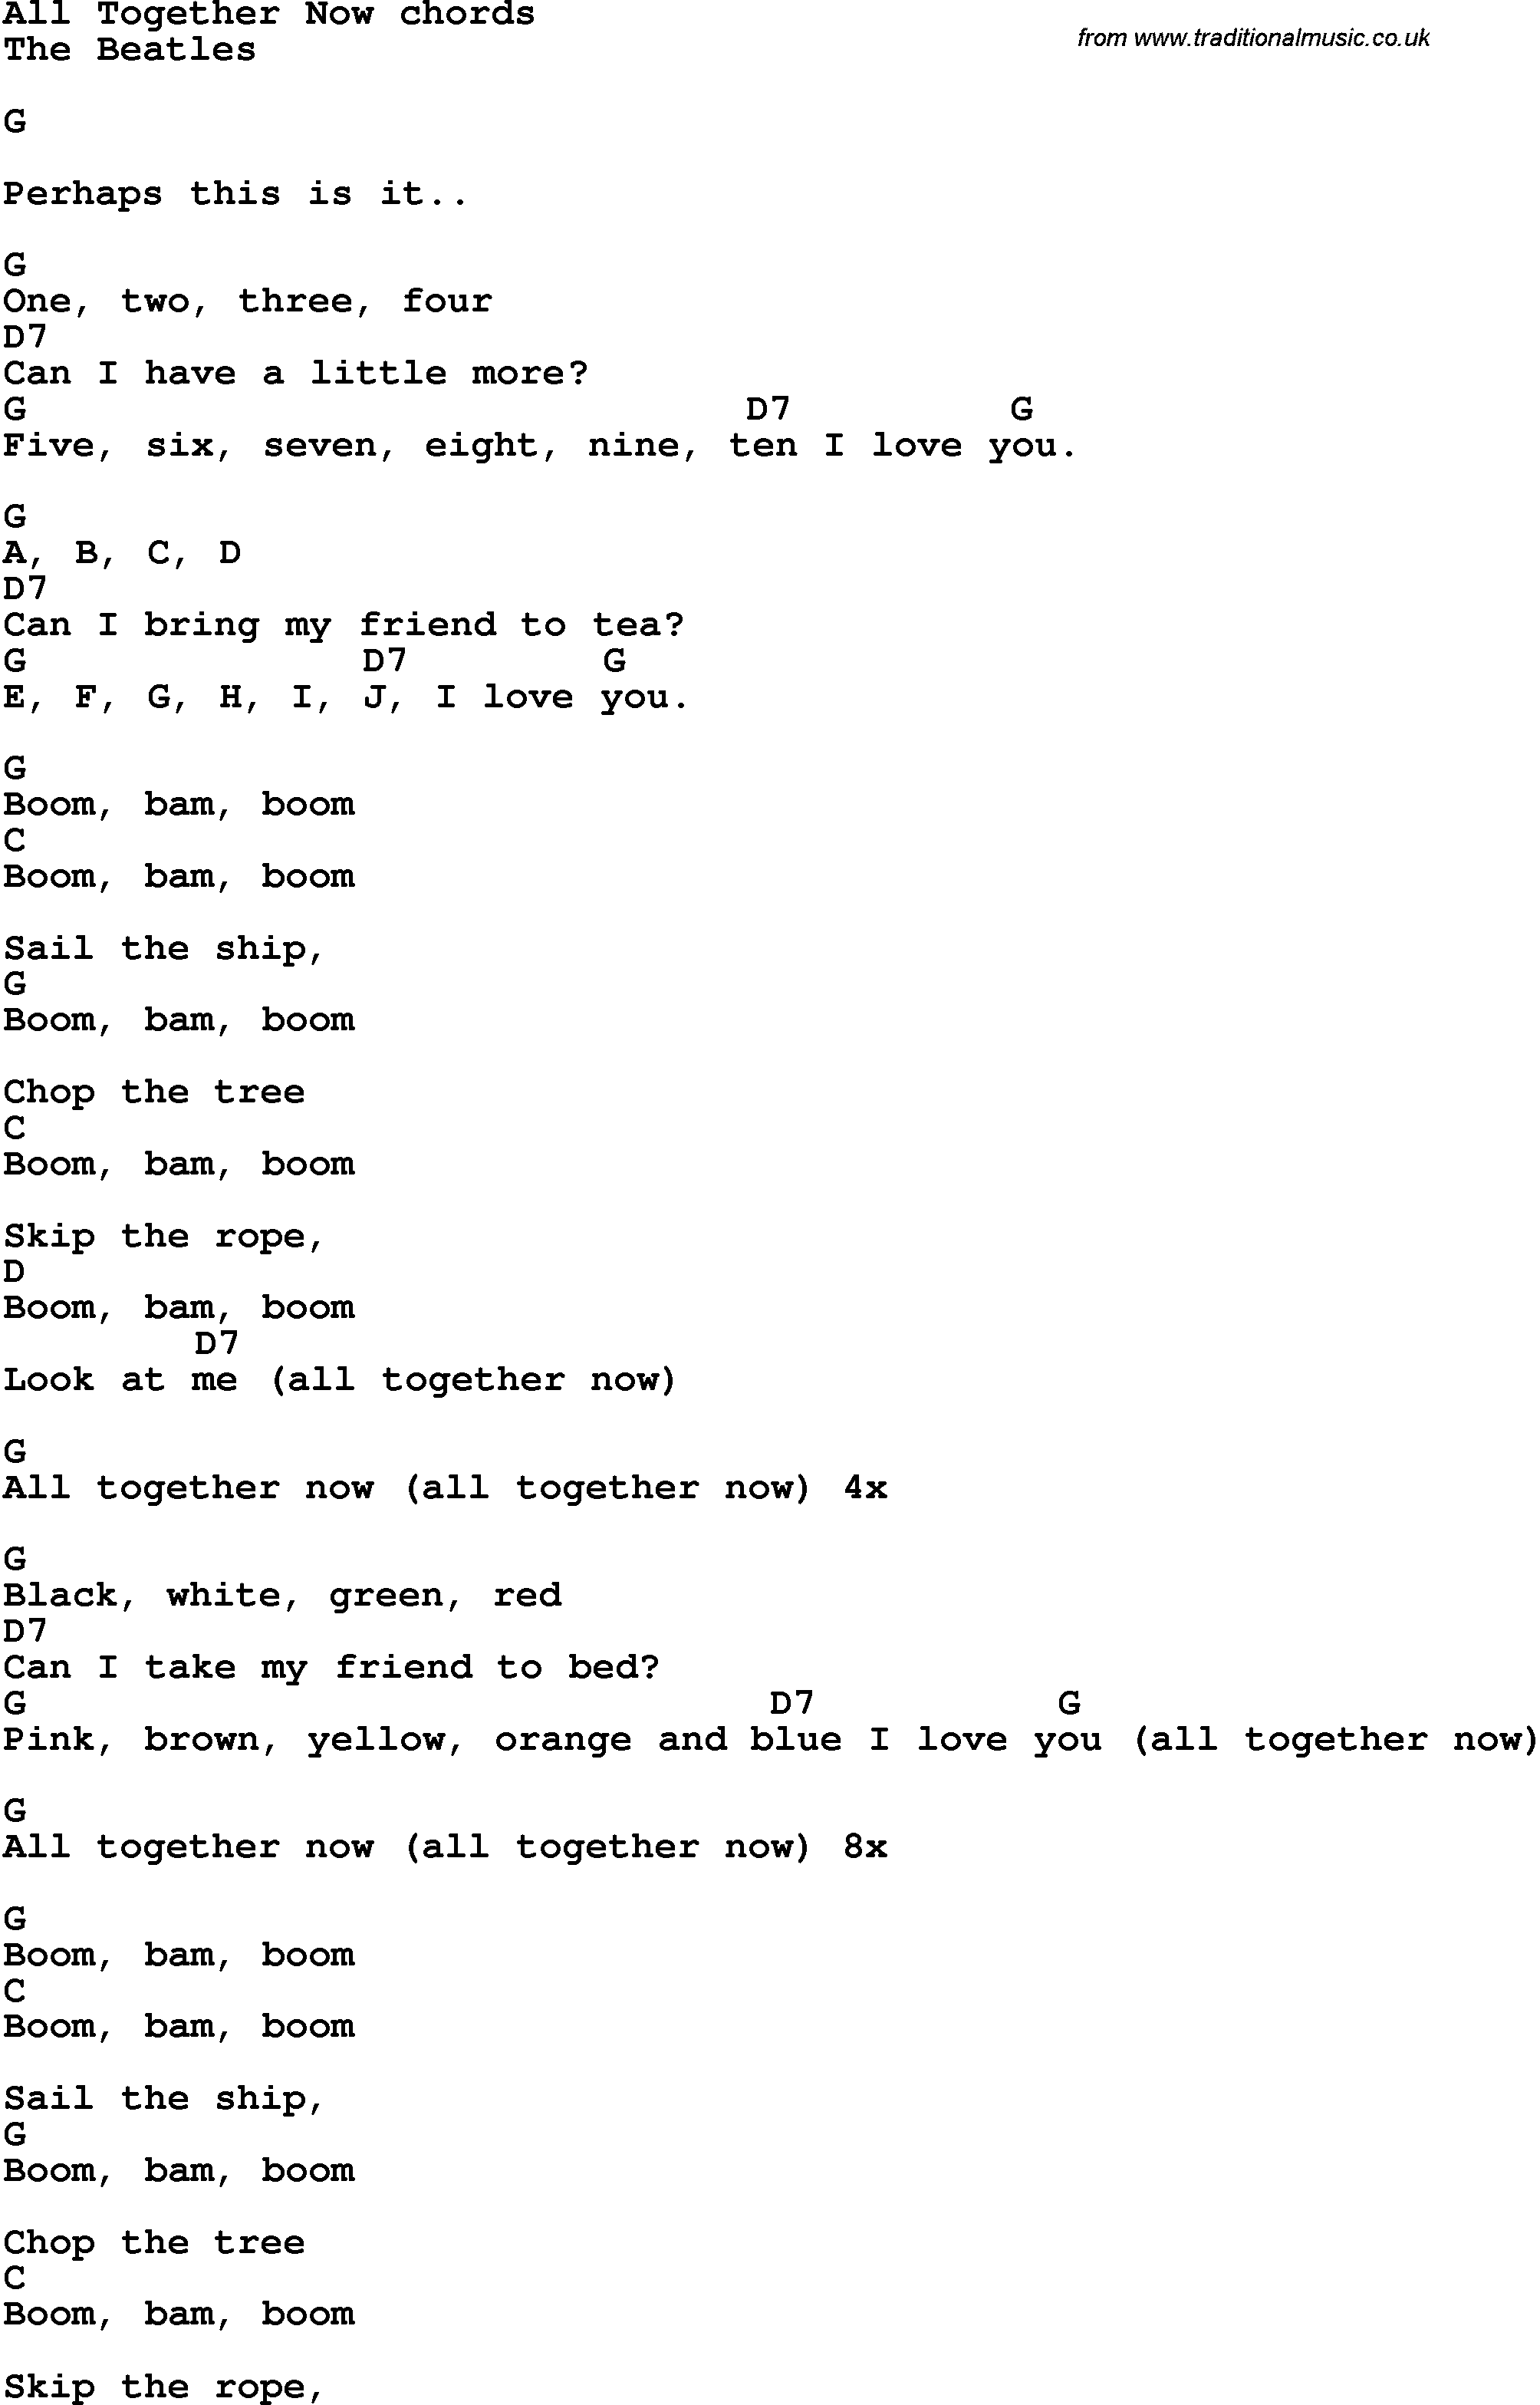 Song Lyrics with guitar chords for All Together Now